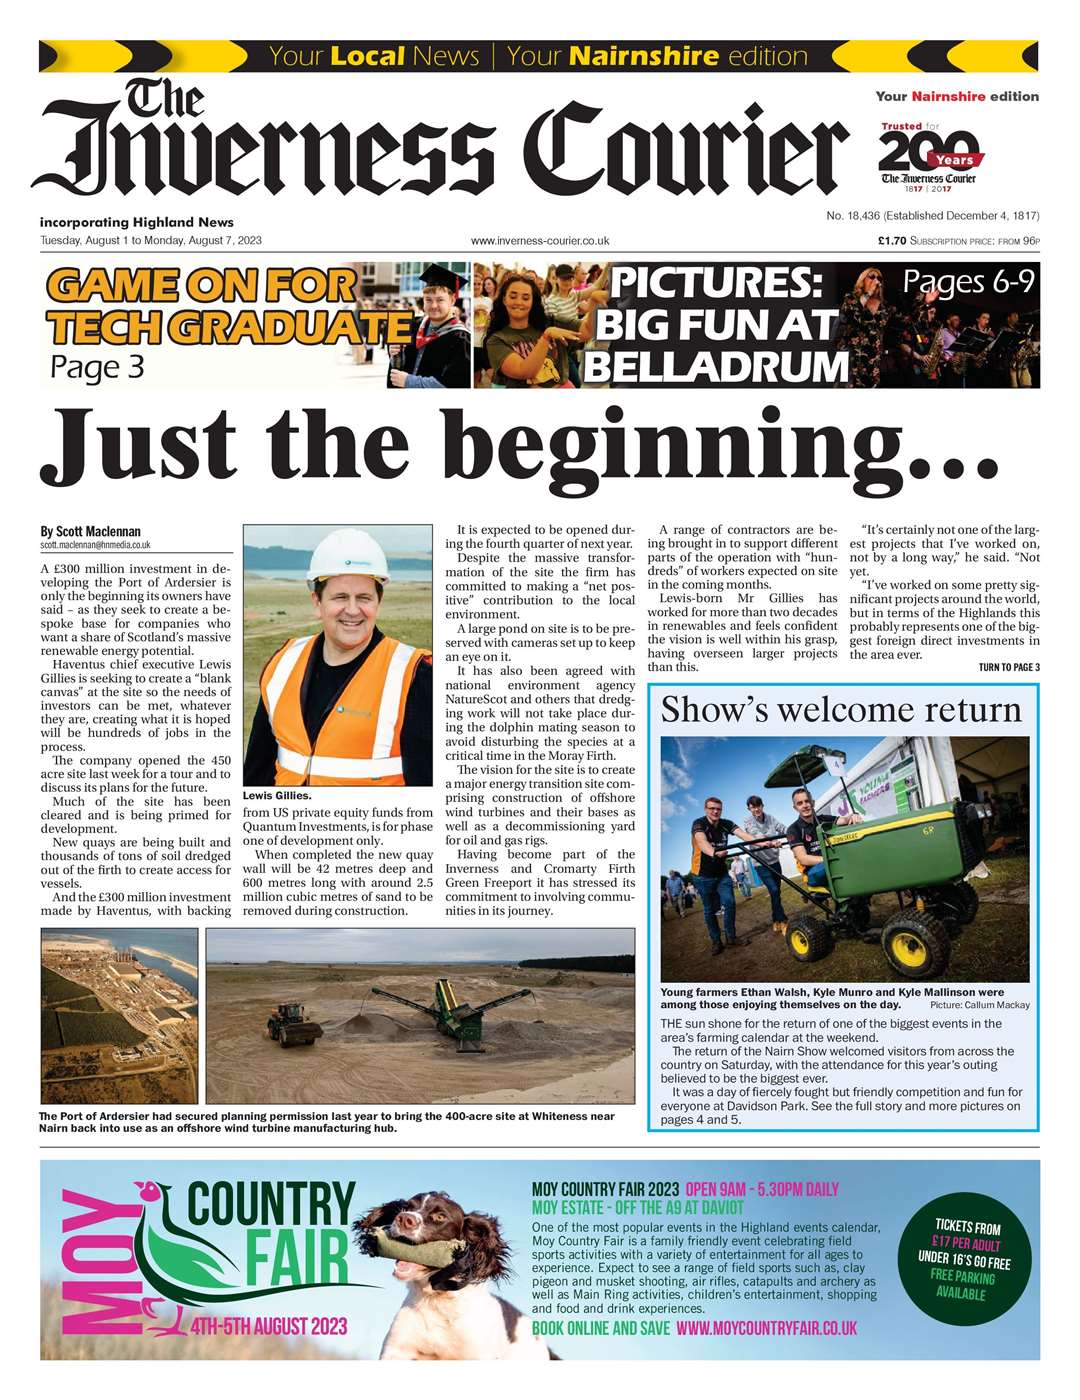 The Inverness Courier (Nairnshire edition), August 1, front page.